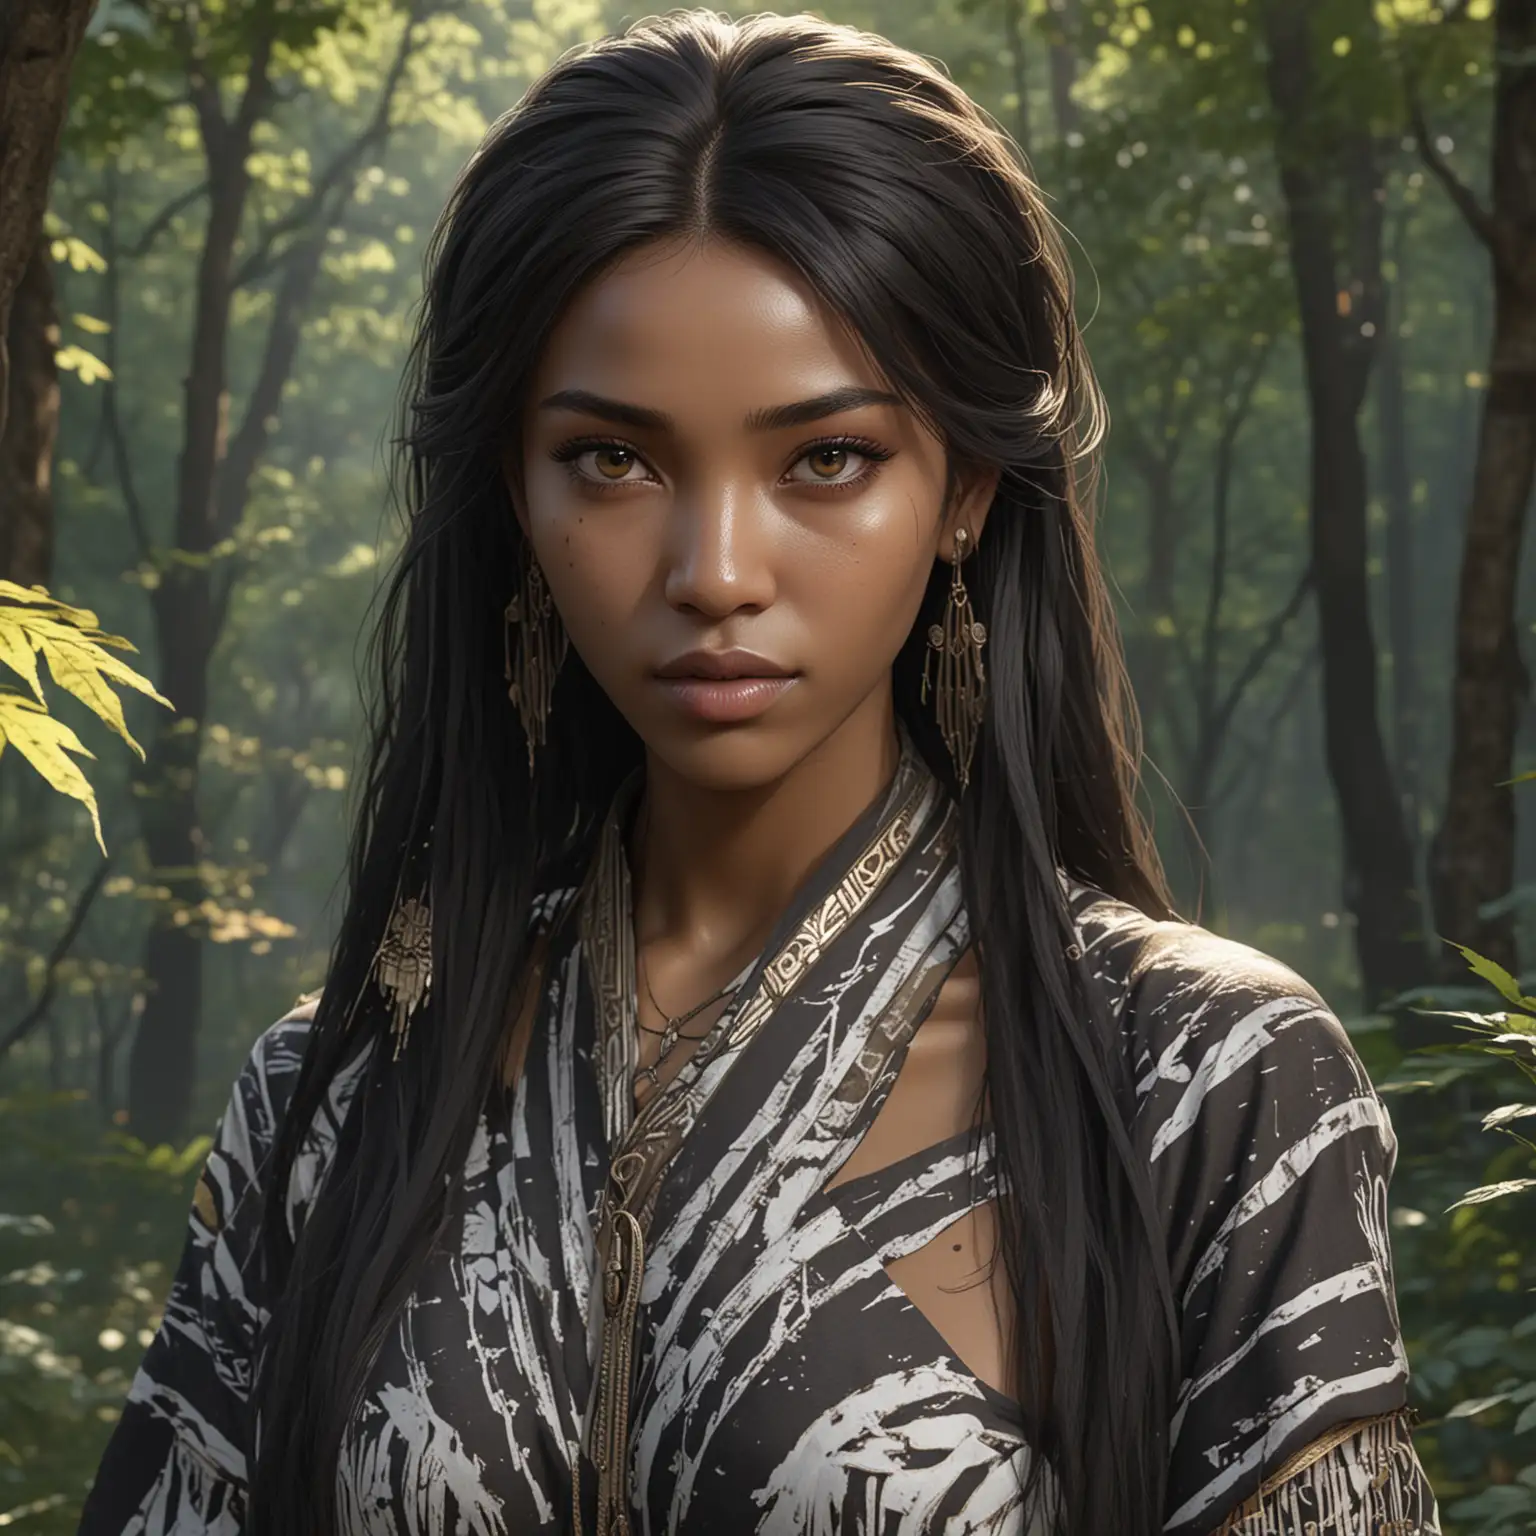 Masterpiece, Best Quality,The Woman, ((Nationality African)),((Black Long Hair)), ((Hazel Eyes)),((GYoun-jung)), photorealistic, Wearing a modest tribal costume, Yoji Shinkawa and Yohji Yamamoto Black Fashion Style, Posing by a forest, Highly Detailed Portrait, Concept Art, ((League of Legends Style Character)), Smooth, 8K Ultra HD, big breast, very hot.